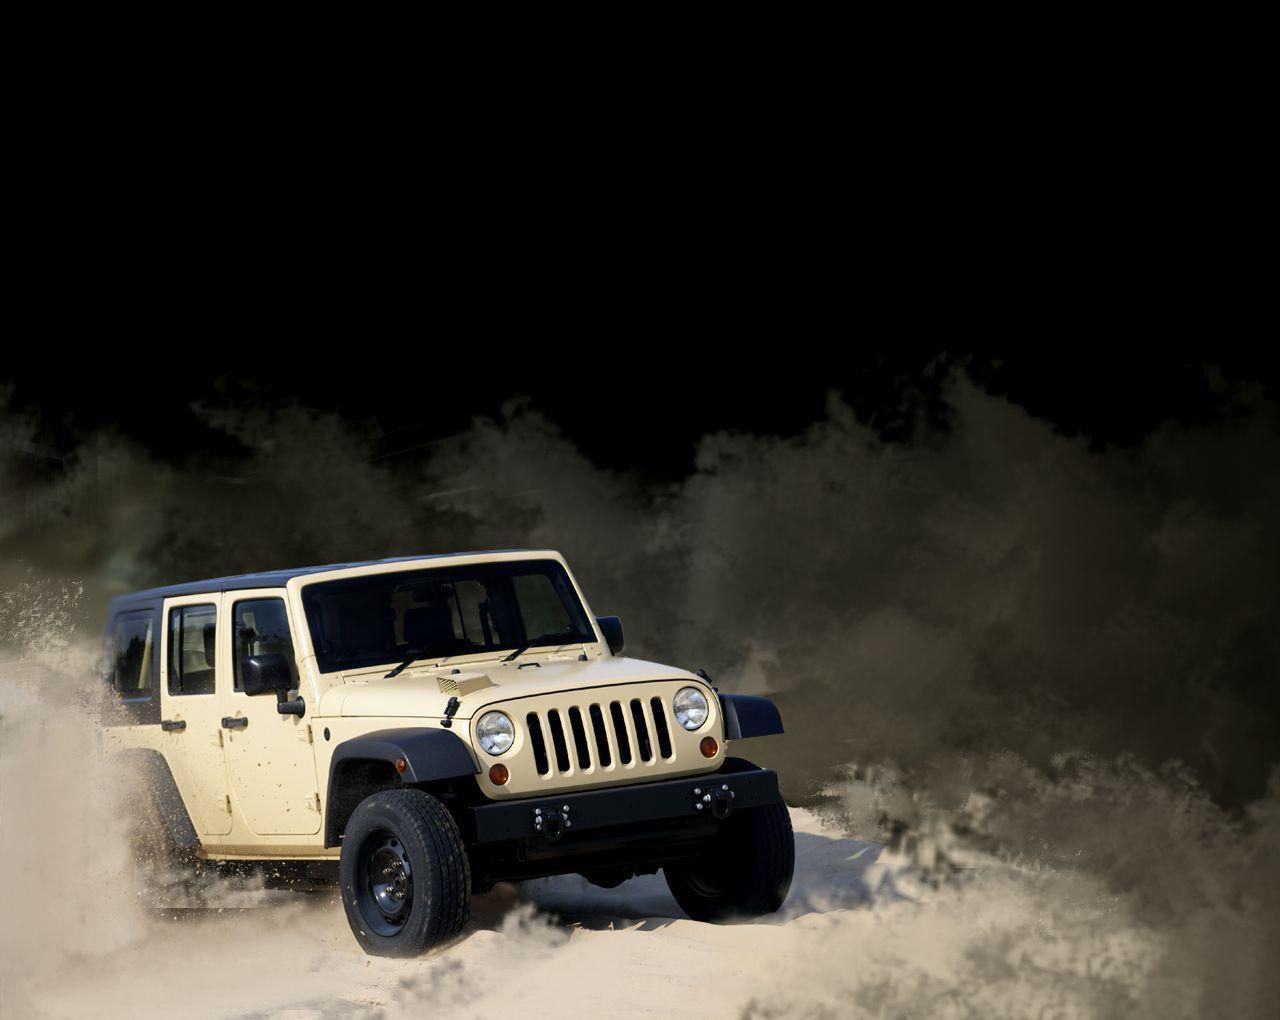 Jeep Wallpapers - Wallpaper Cave